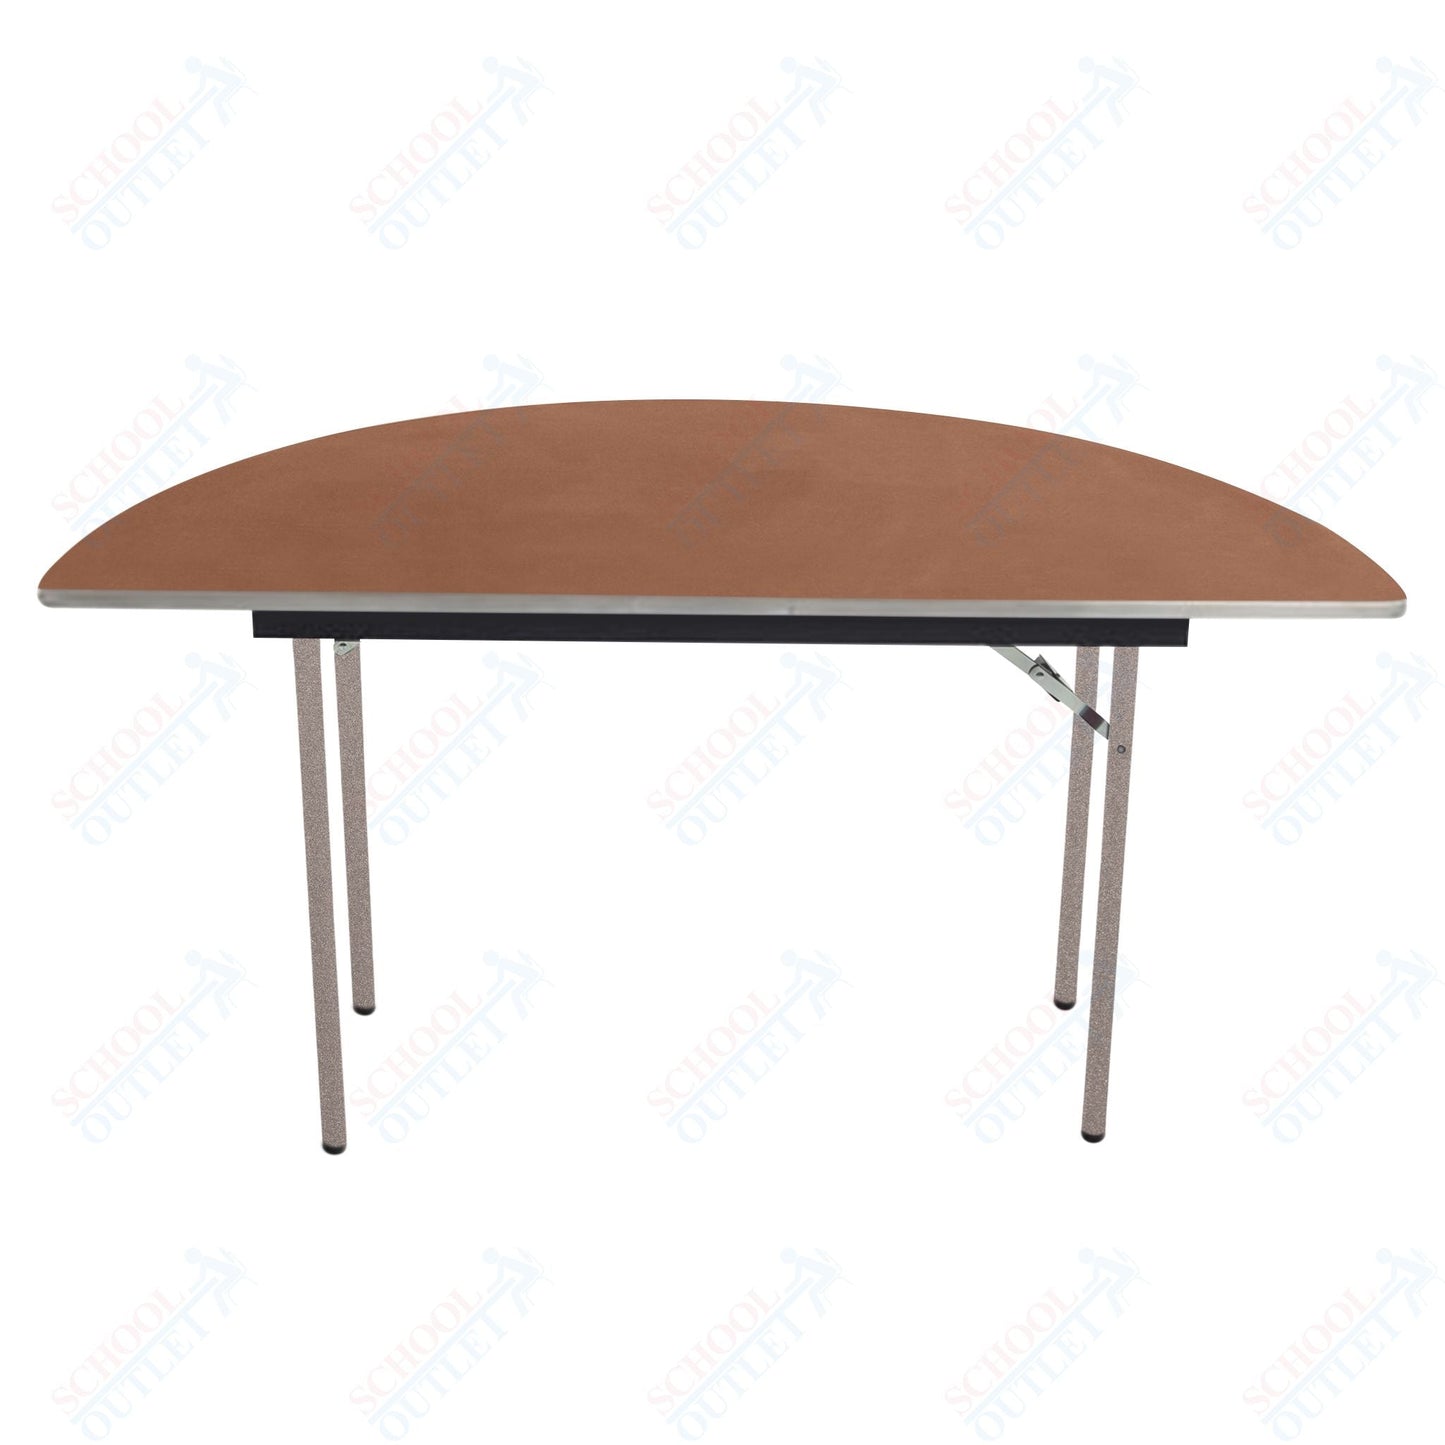 AmTab Folding Table - Plywood Stained and Sealed - Aluminum Edge - Half Round - Half 60" Diameter x 29"H (AmTab AMT - HR60PA) - SchoolOutlet